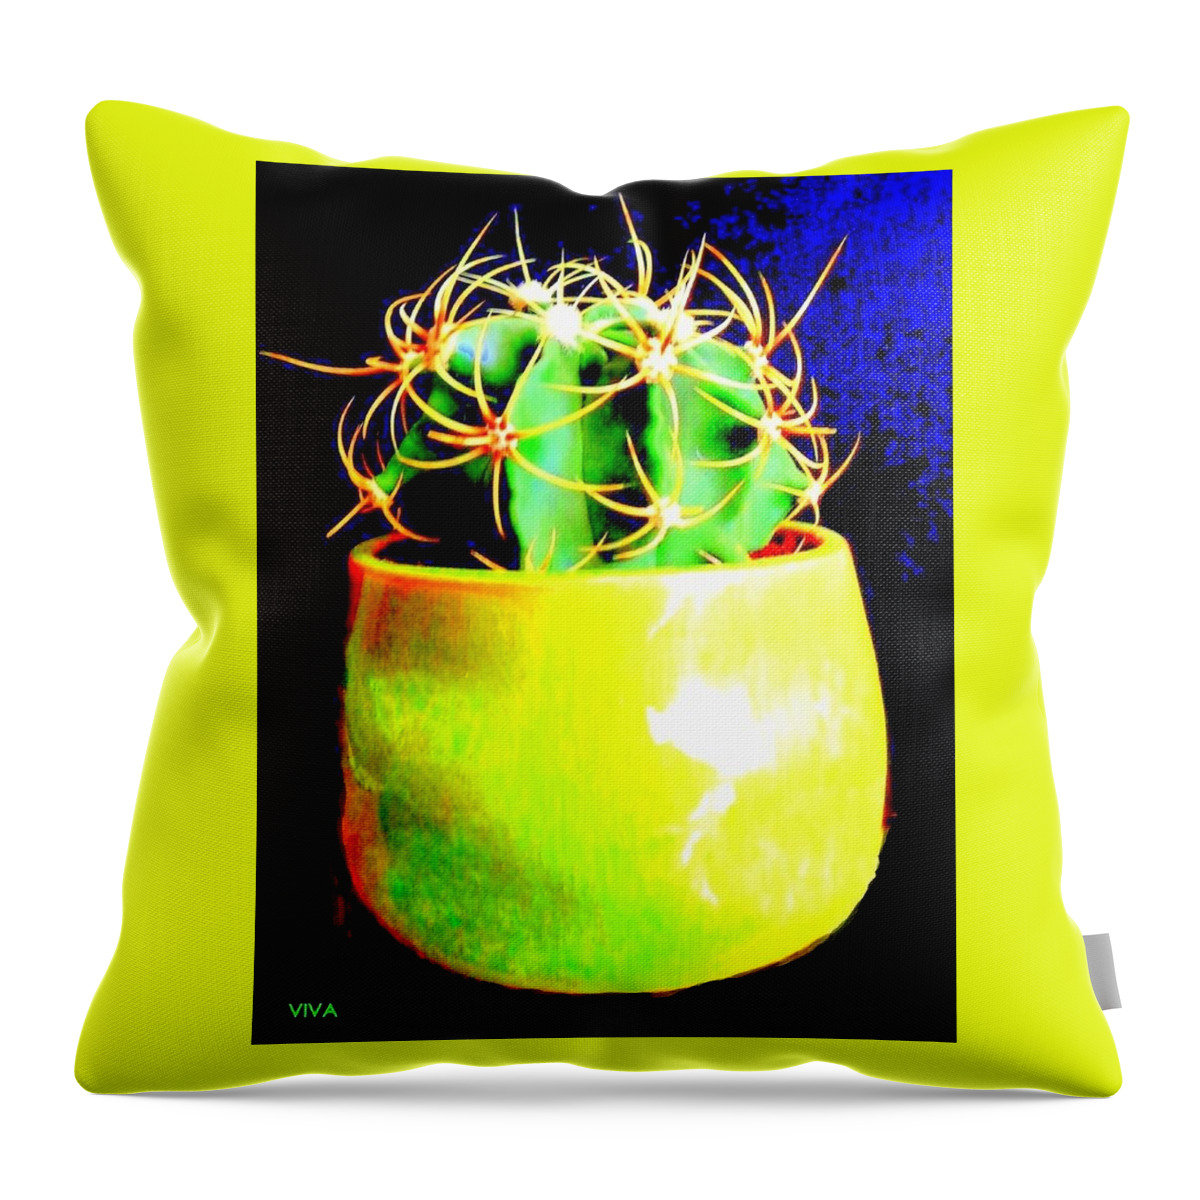 Cactus Contemporary Throw Pillow featuring the photograph Contemporary Cactus by VIVA Anderson